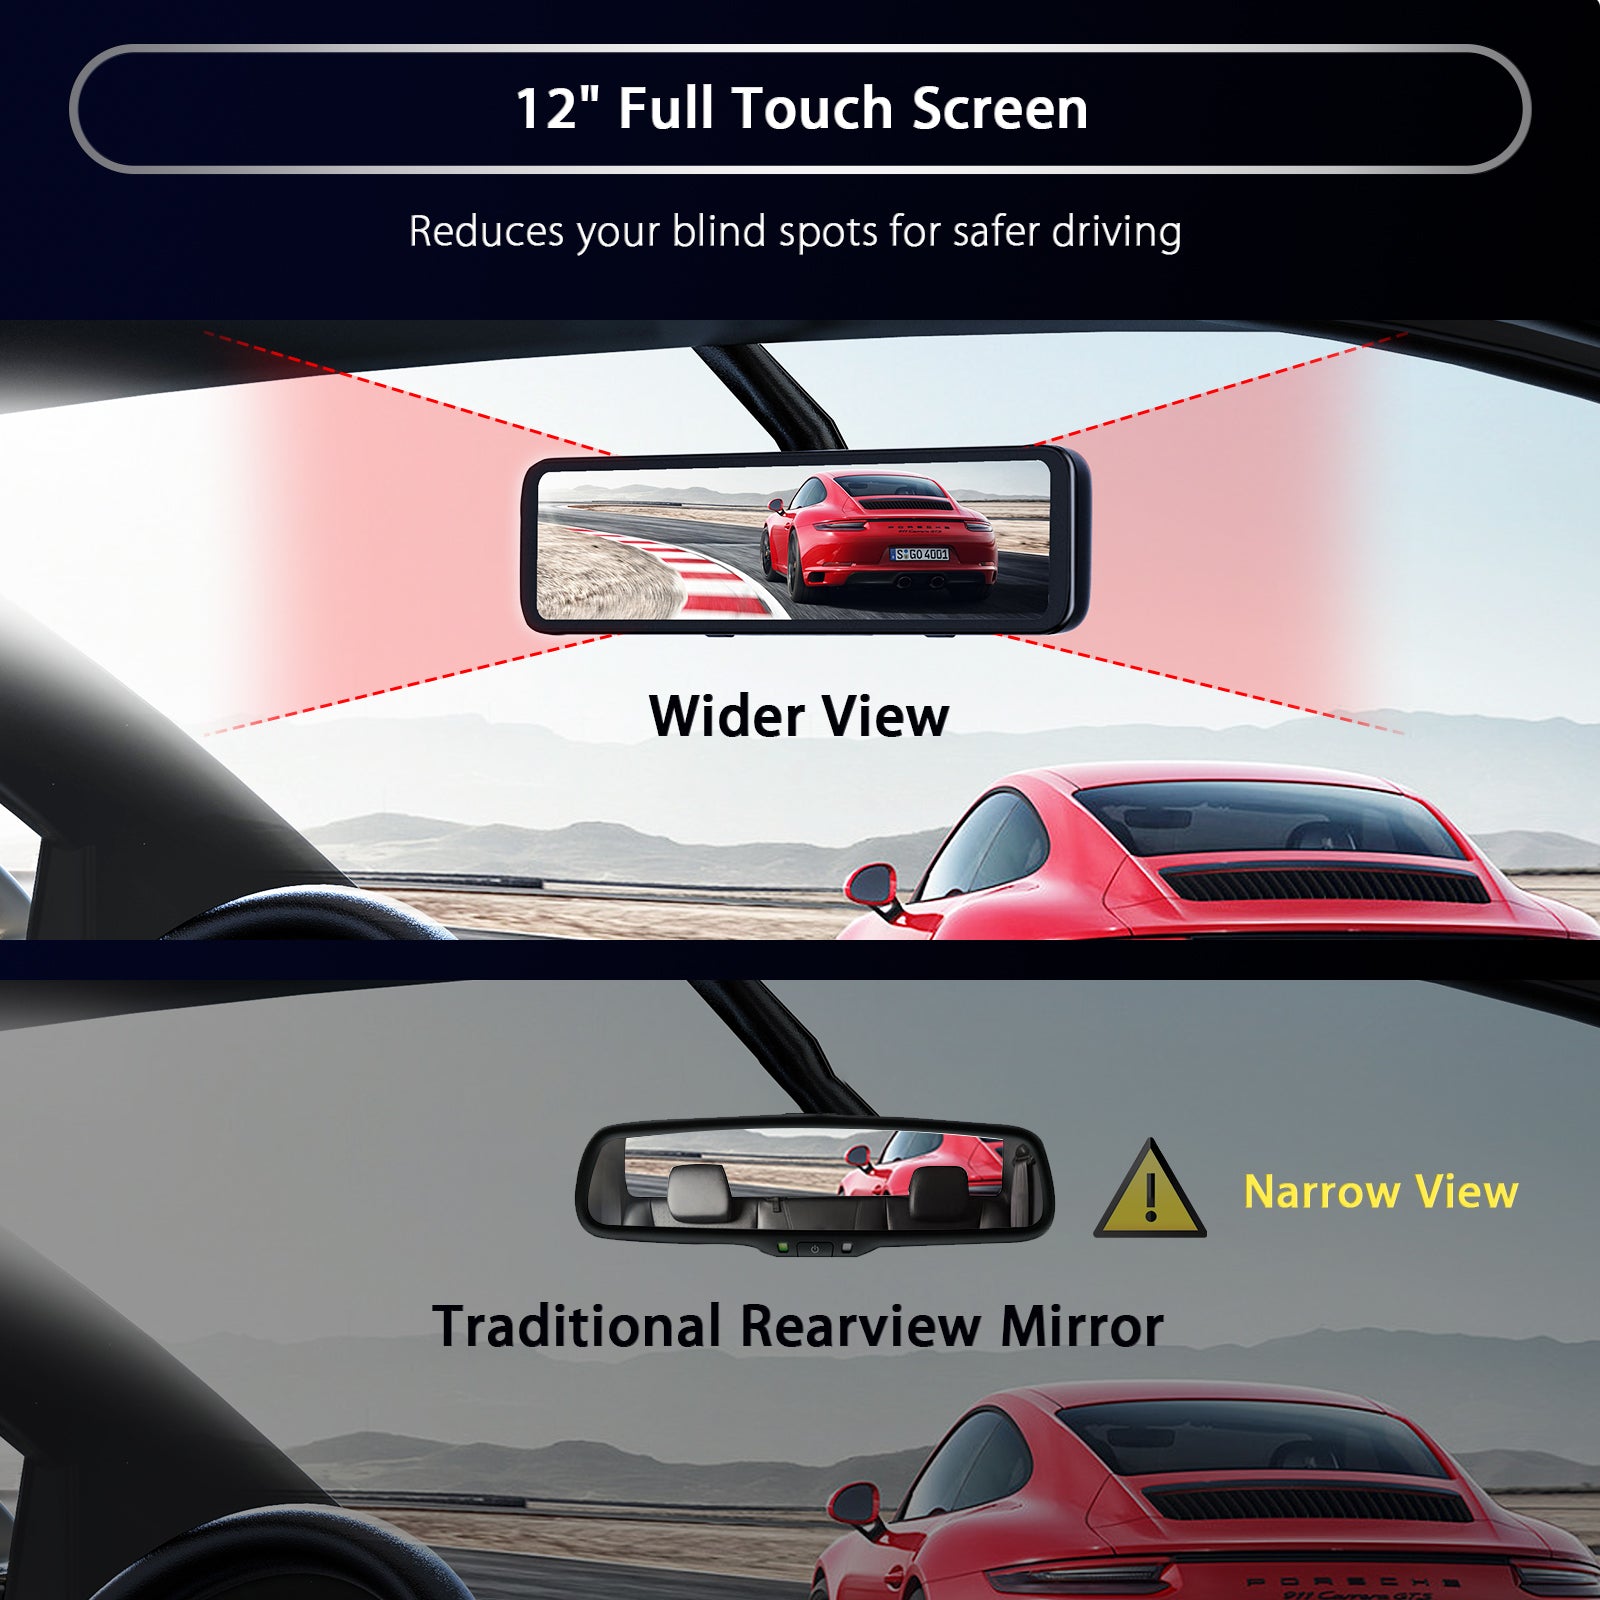 D80 with12" screen reduces blind spots, enhances driving safety compared to traditional mirrors.